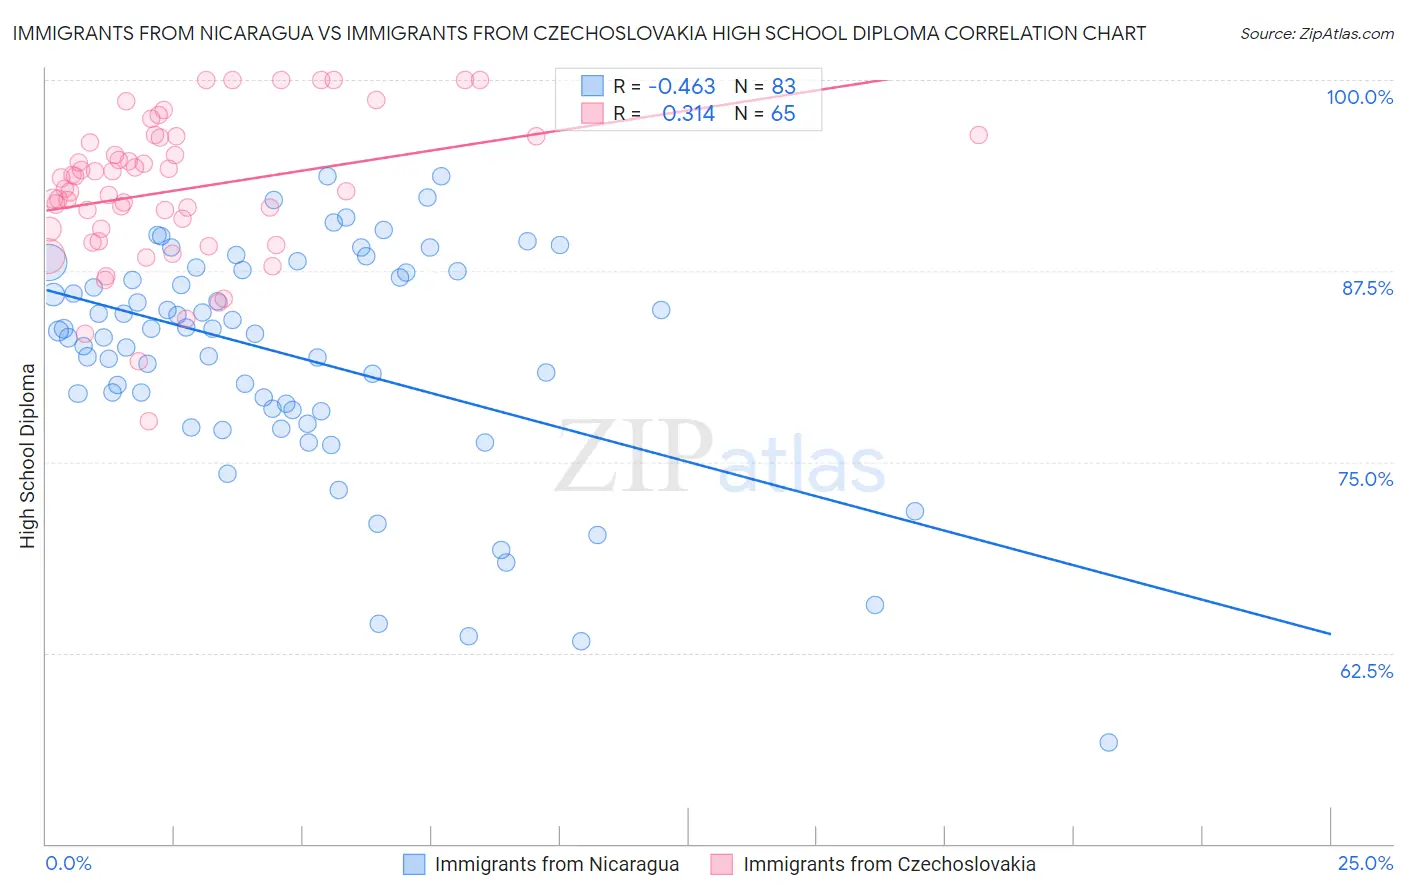 Immigrants from Nicaragua vs Immigrants from Czechoslovakia High School Diploma